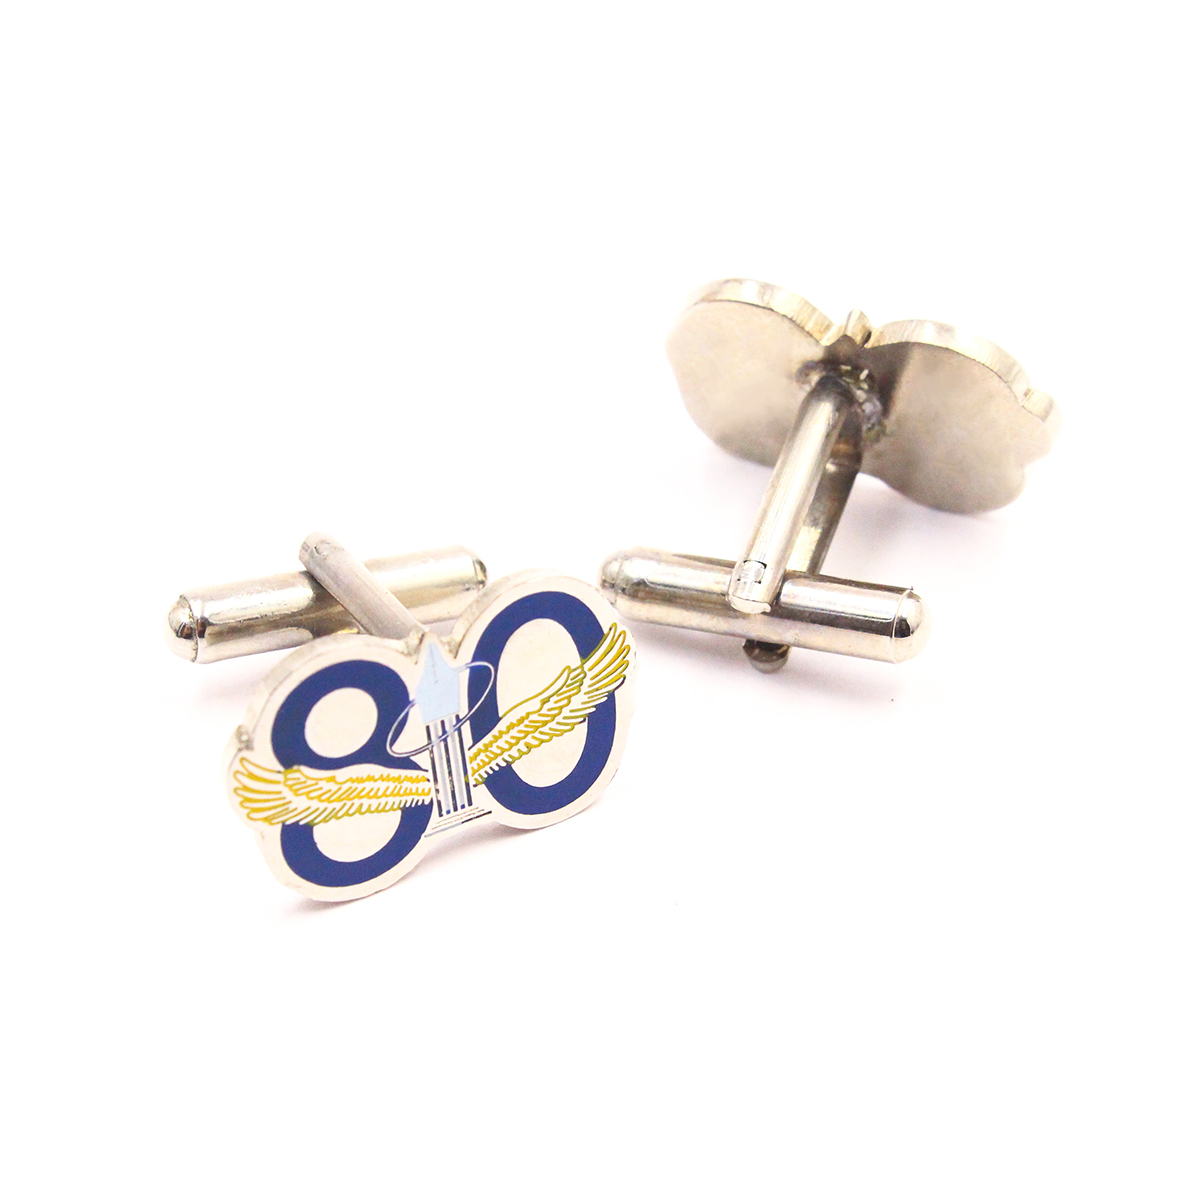 the customized cufflinks in golden and blue plating